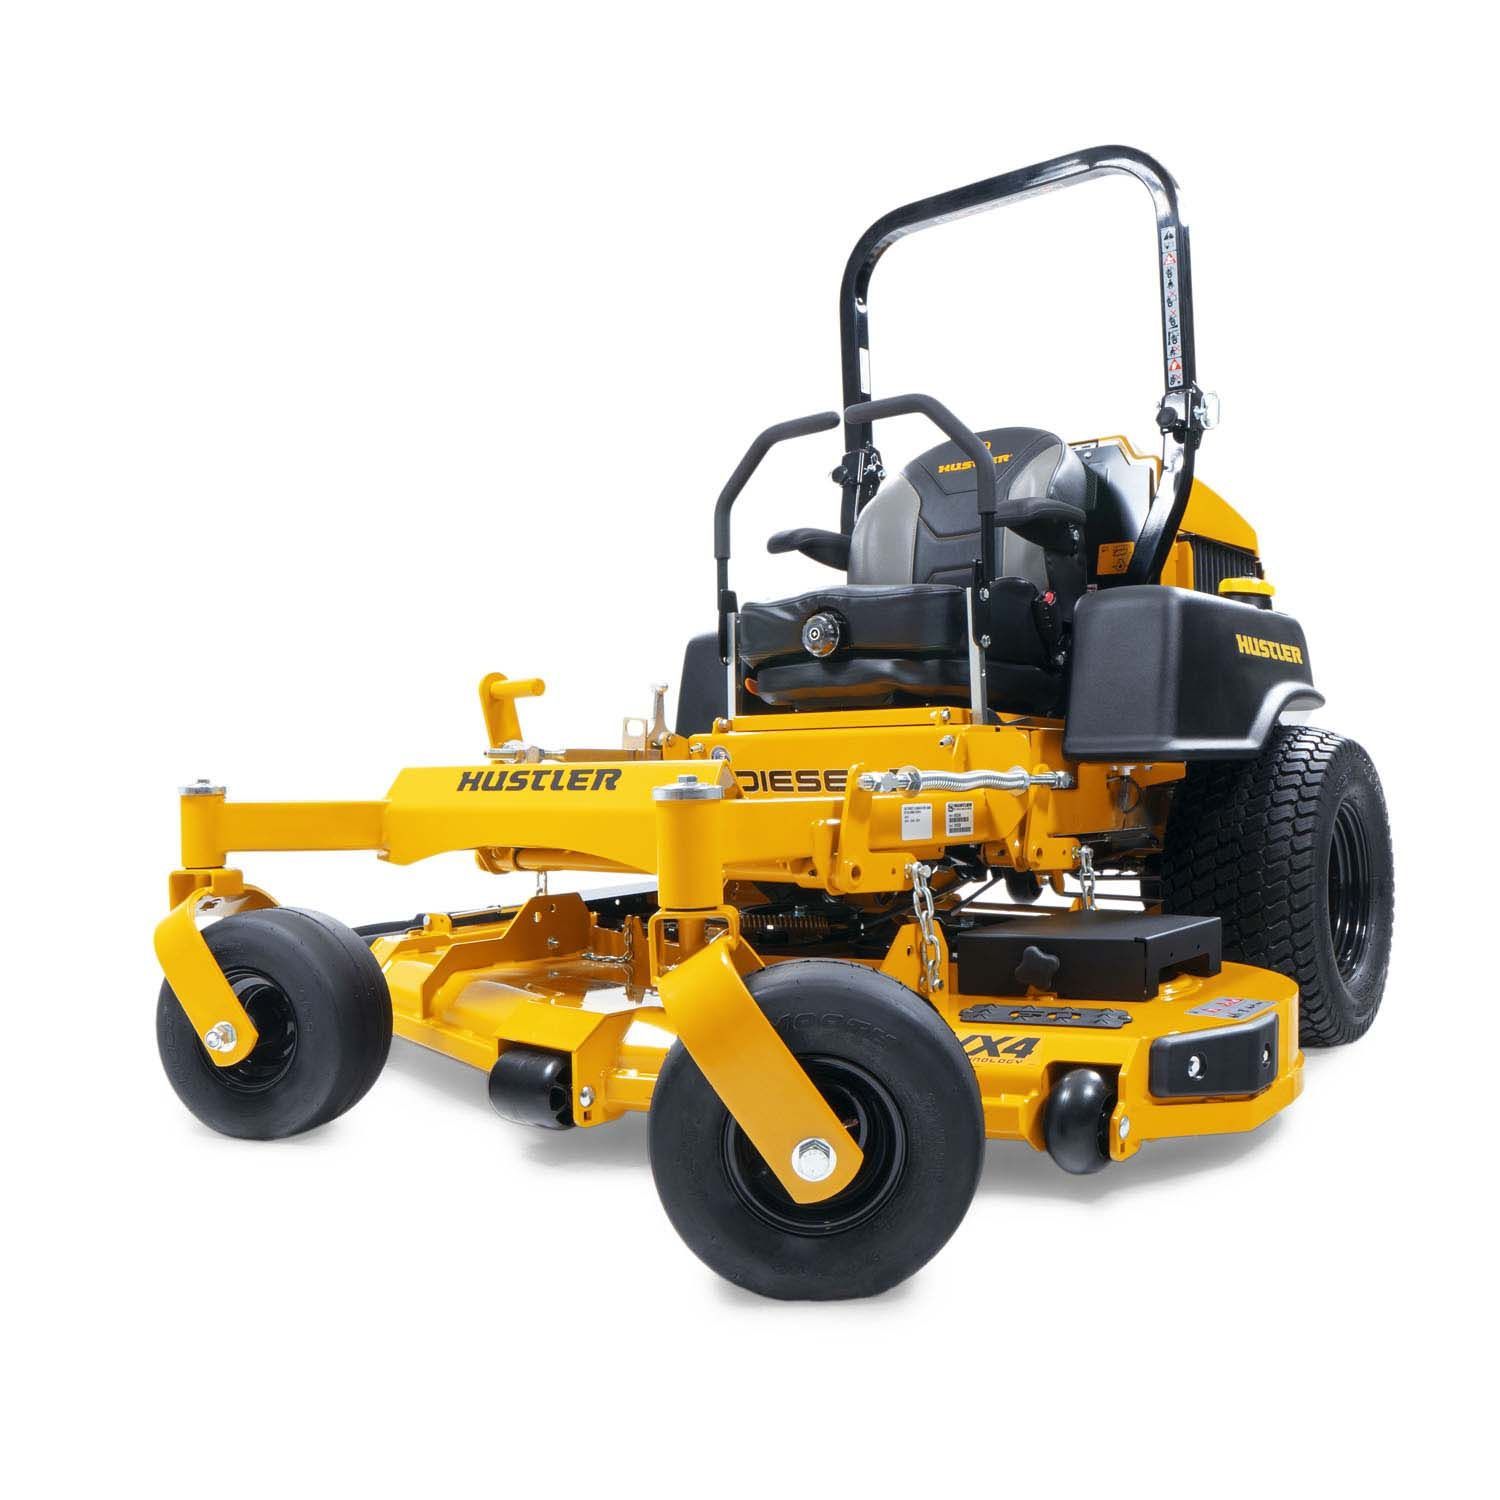 A yellow lawn mower is sitting on a white surface